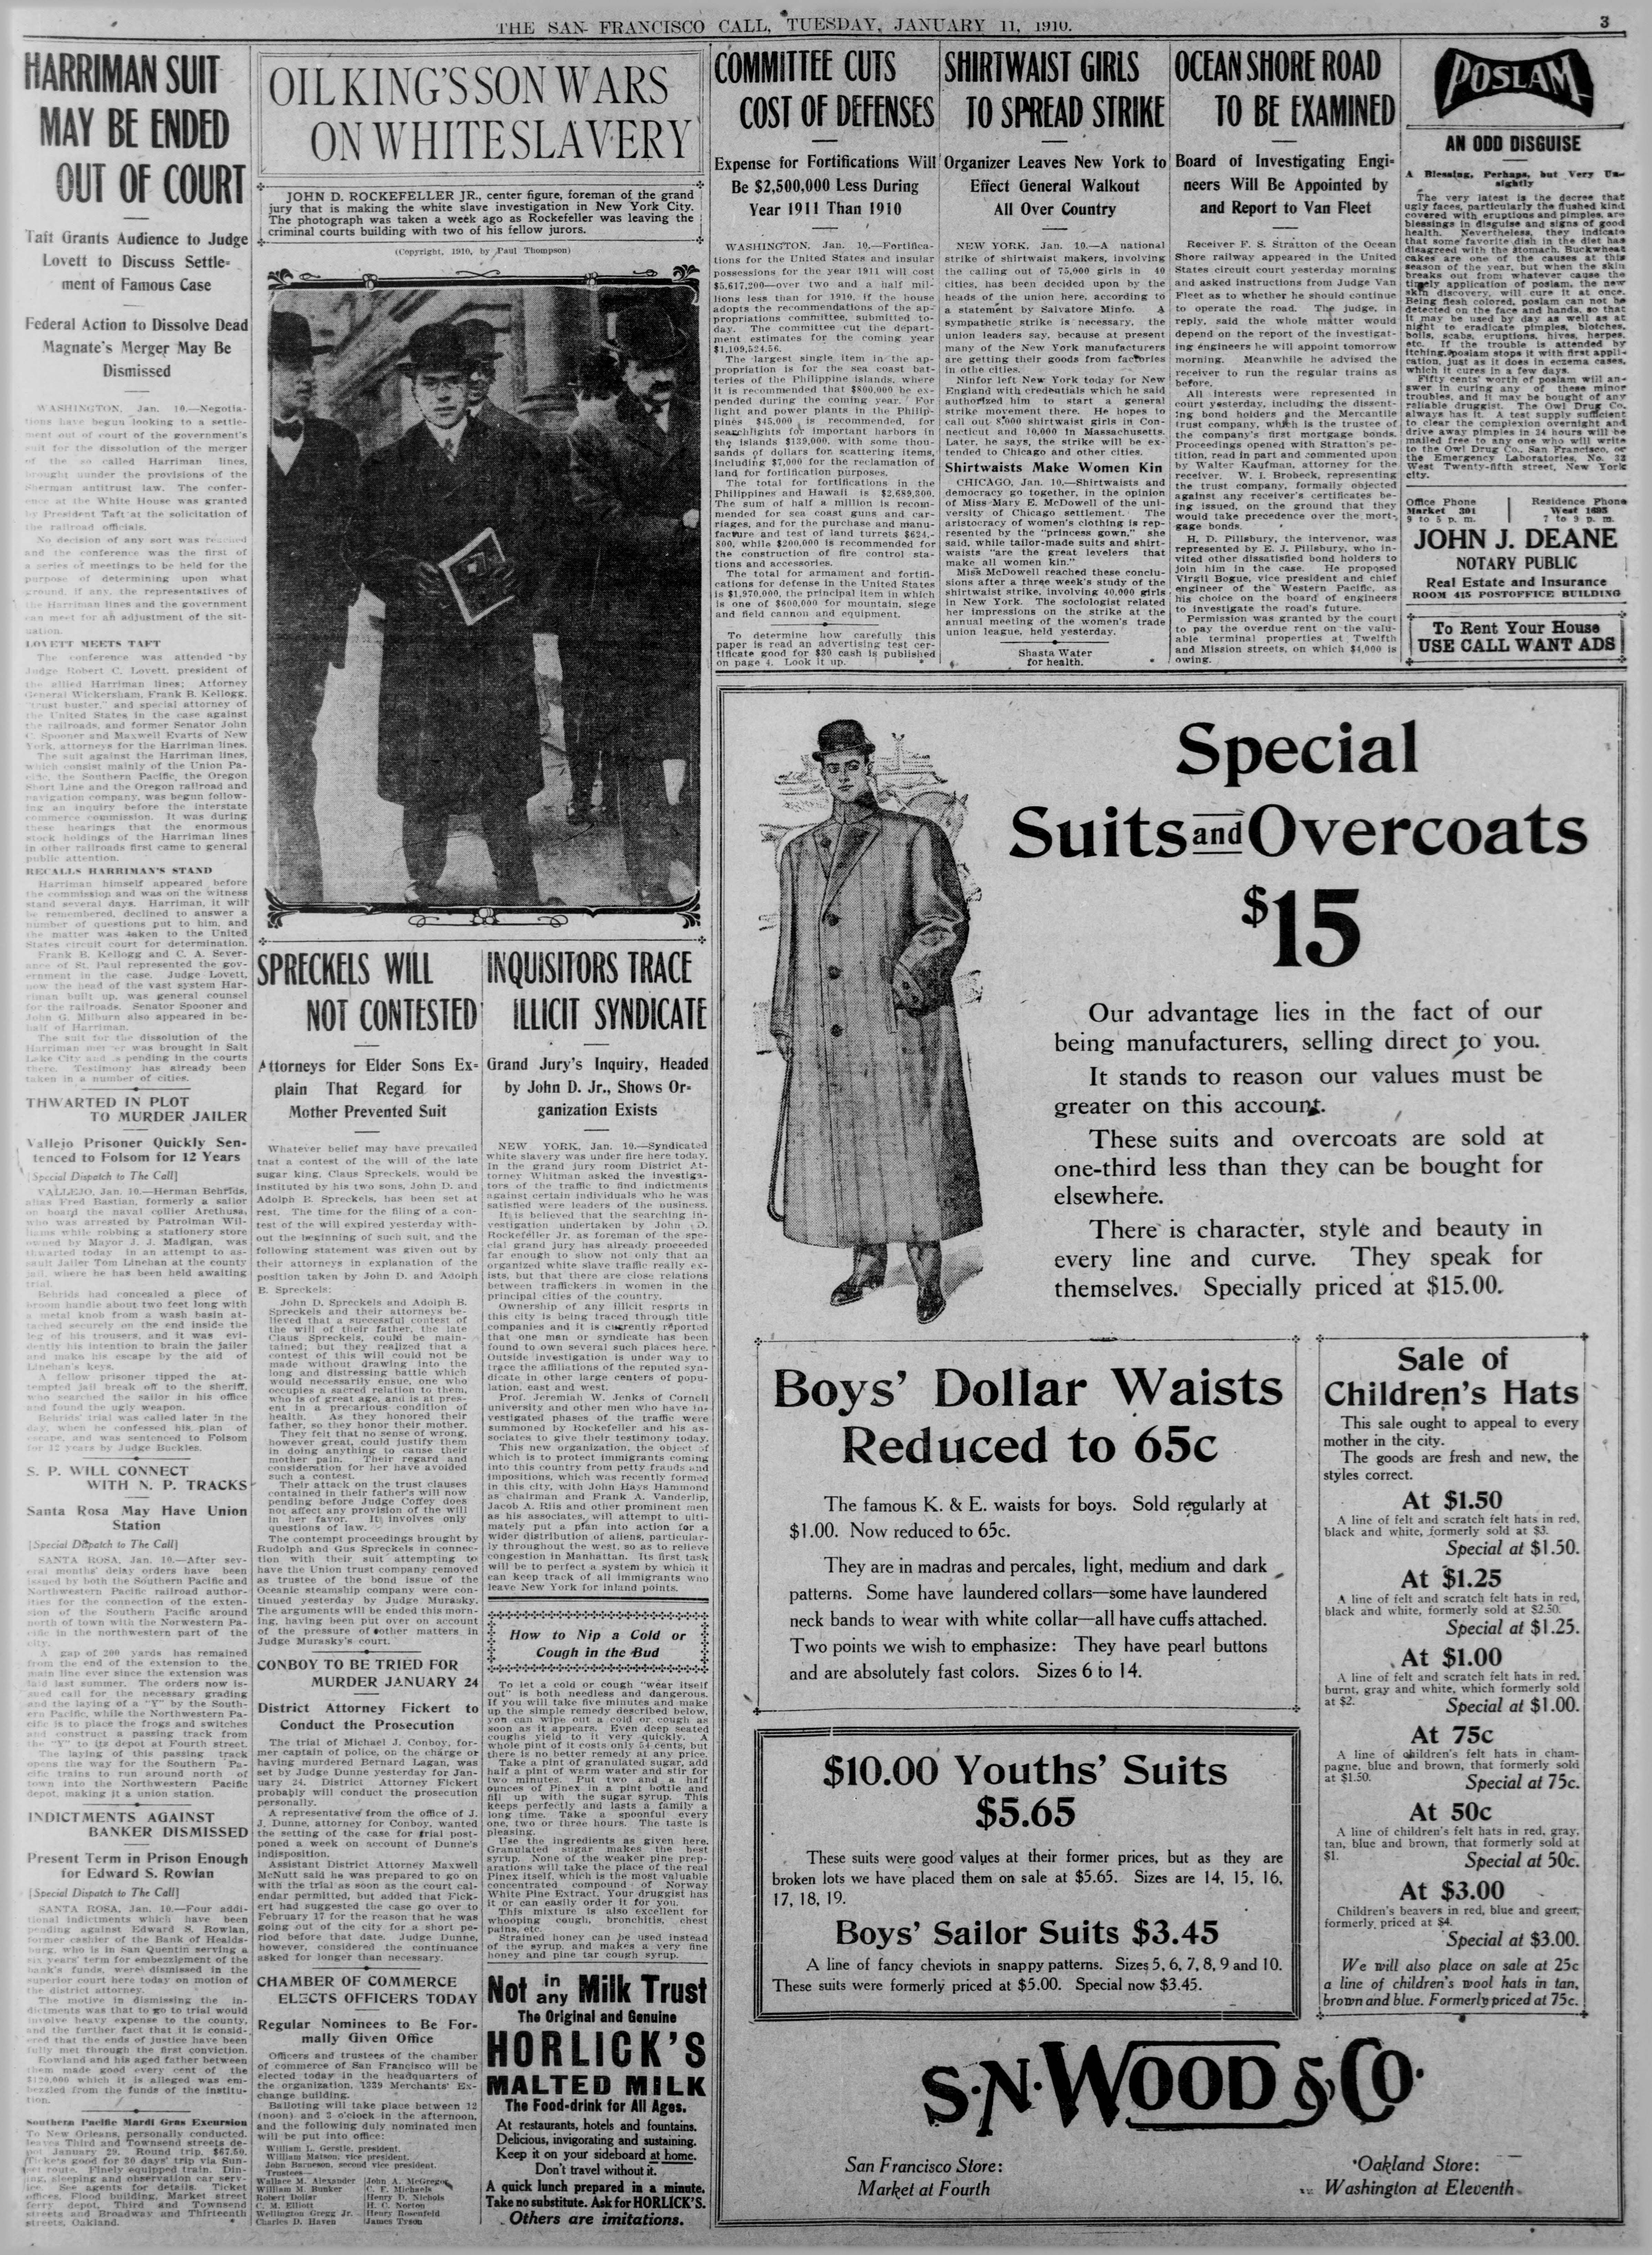 Photo of the San Francisco Call newspaper detailing Rockefeller's work with the grand jury investigating white slavery.